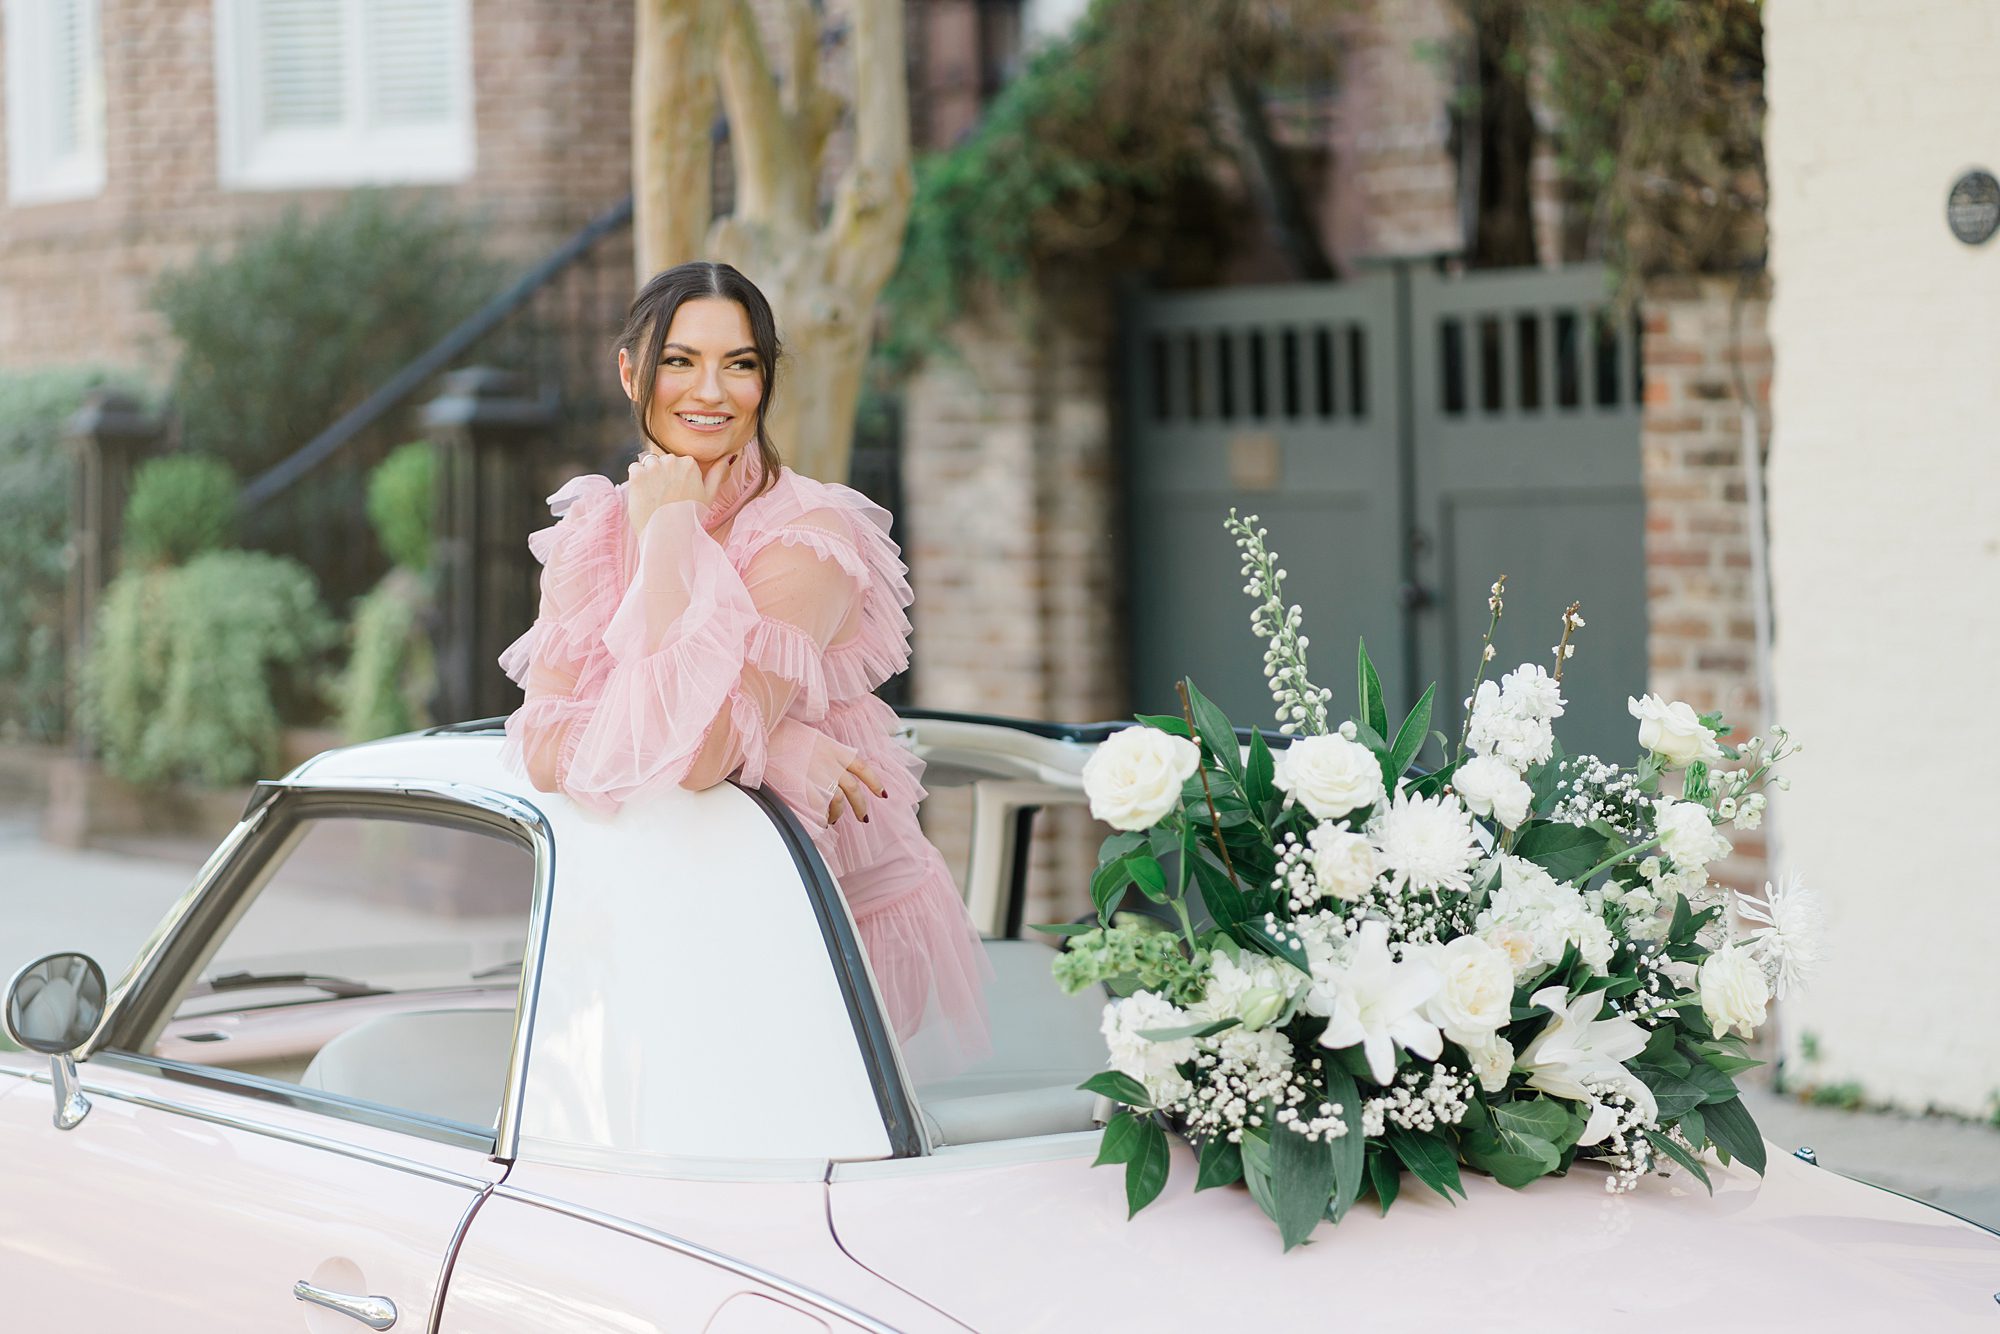 white floral arrangements decorate the pink Figgy during this fun Charleston photoshoot